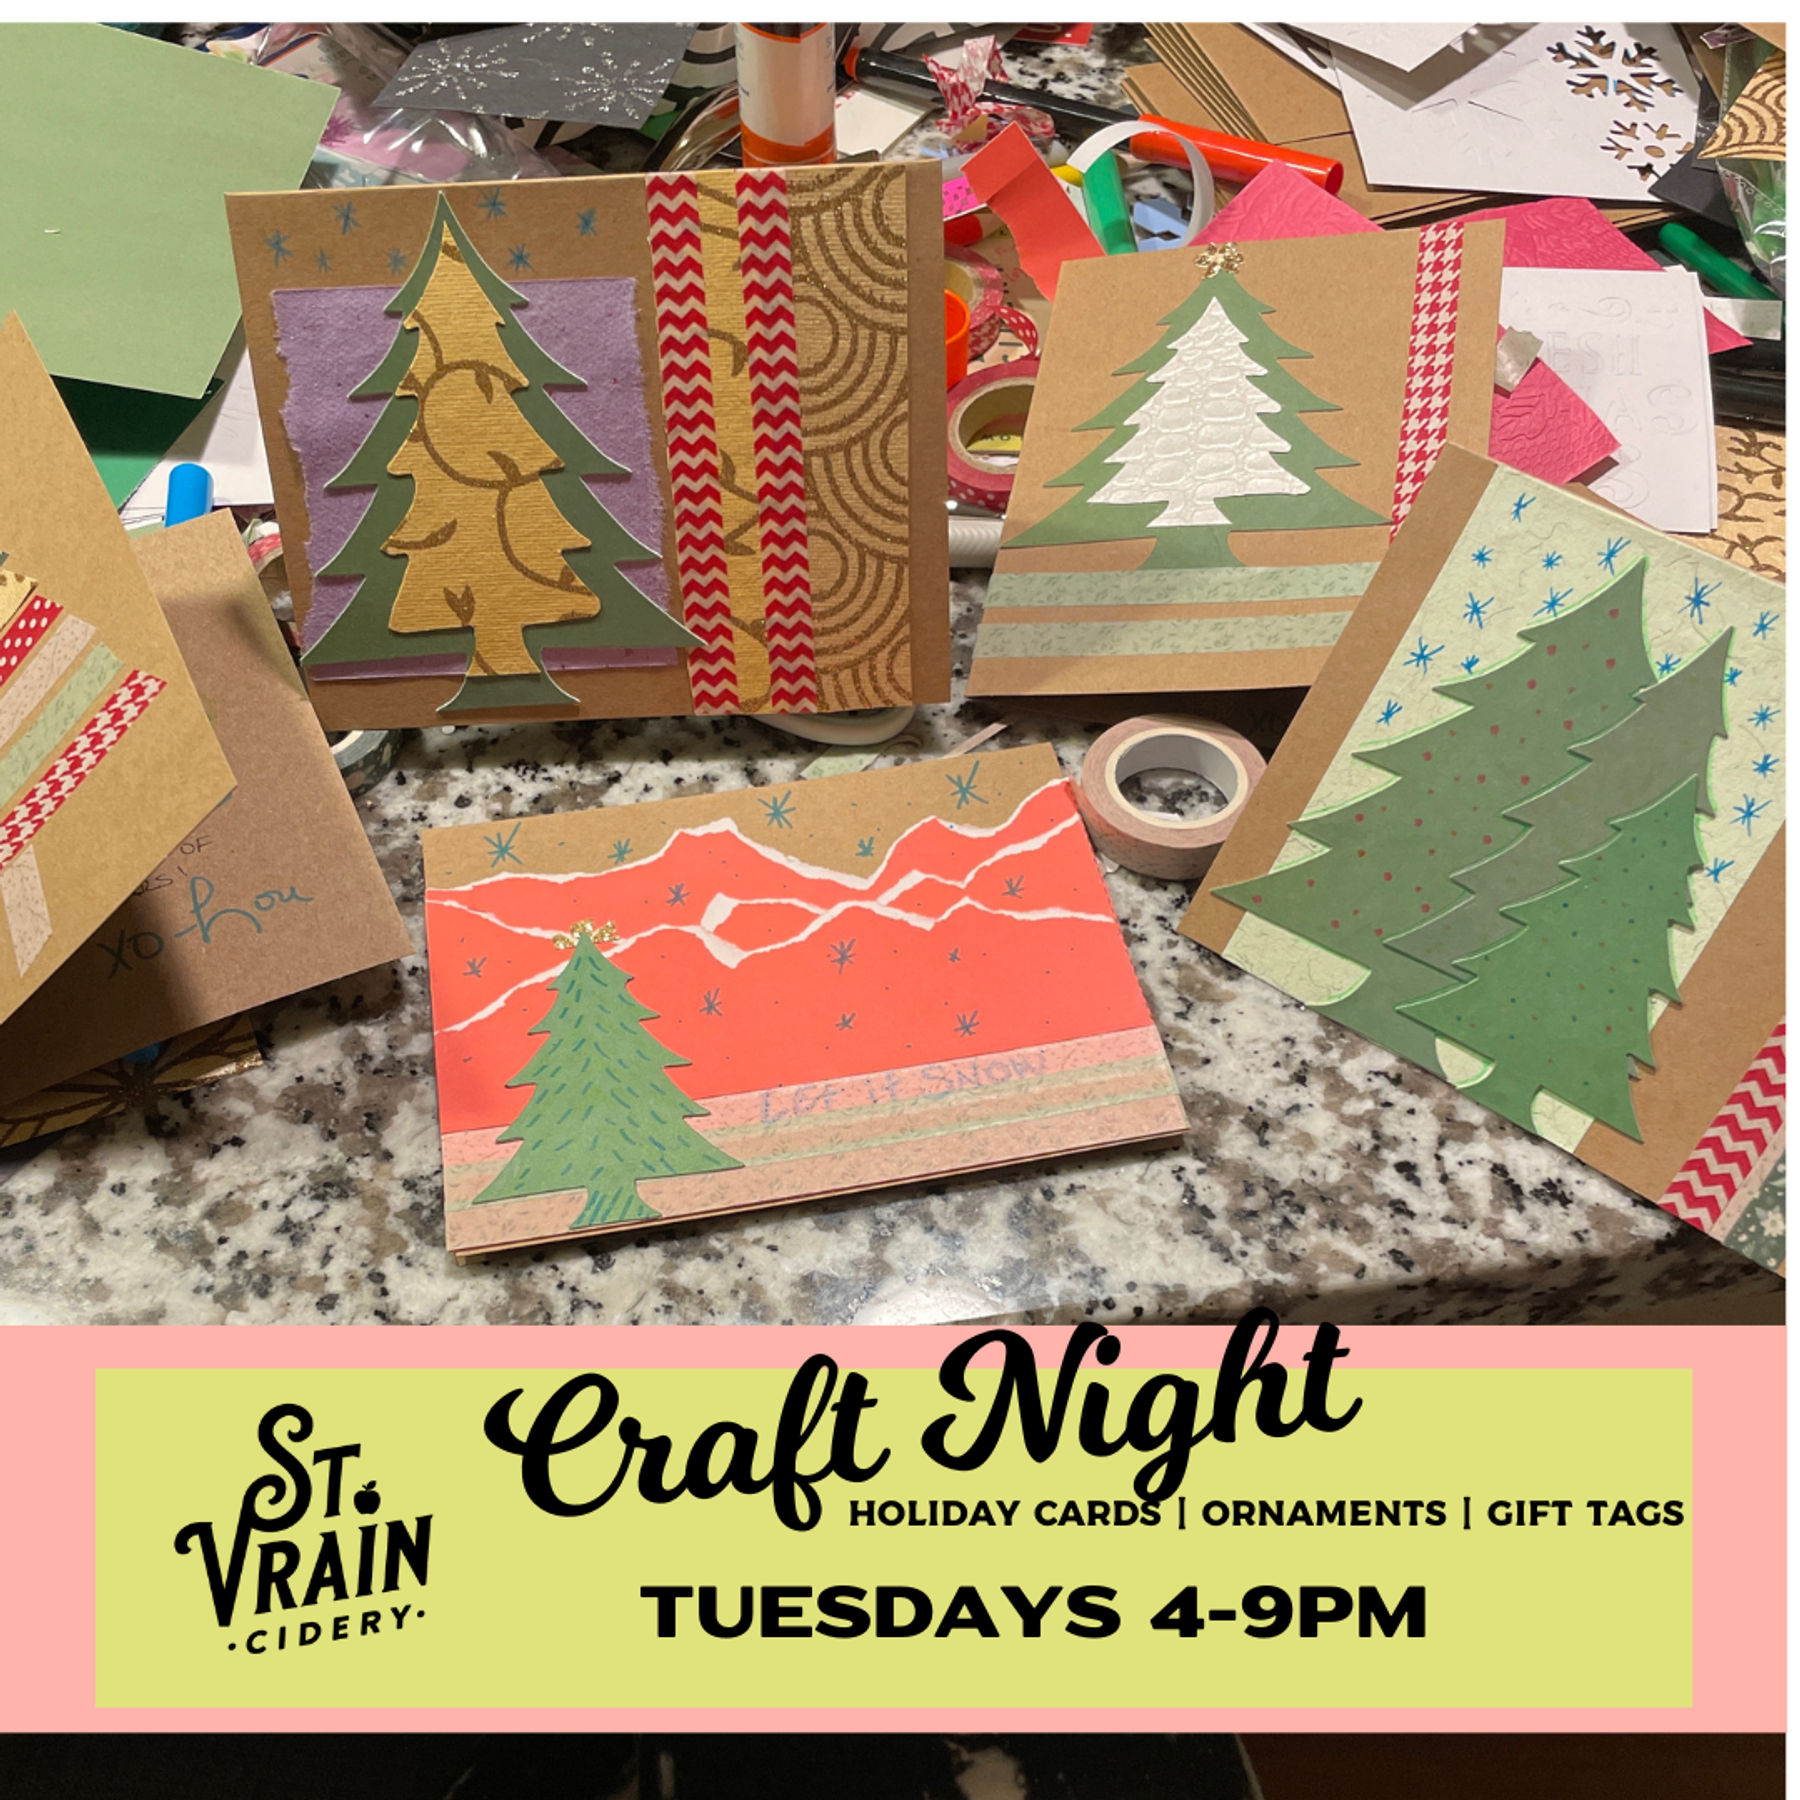 Tuesday Craft Nights at St. Vrain Cidery